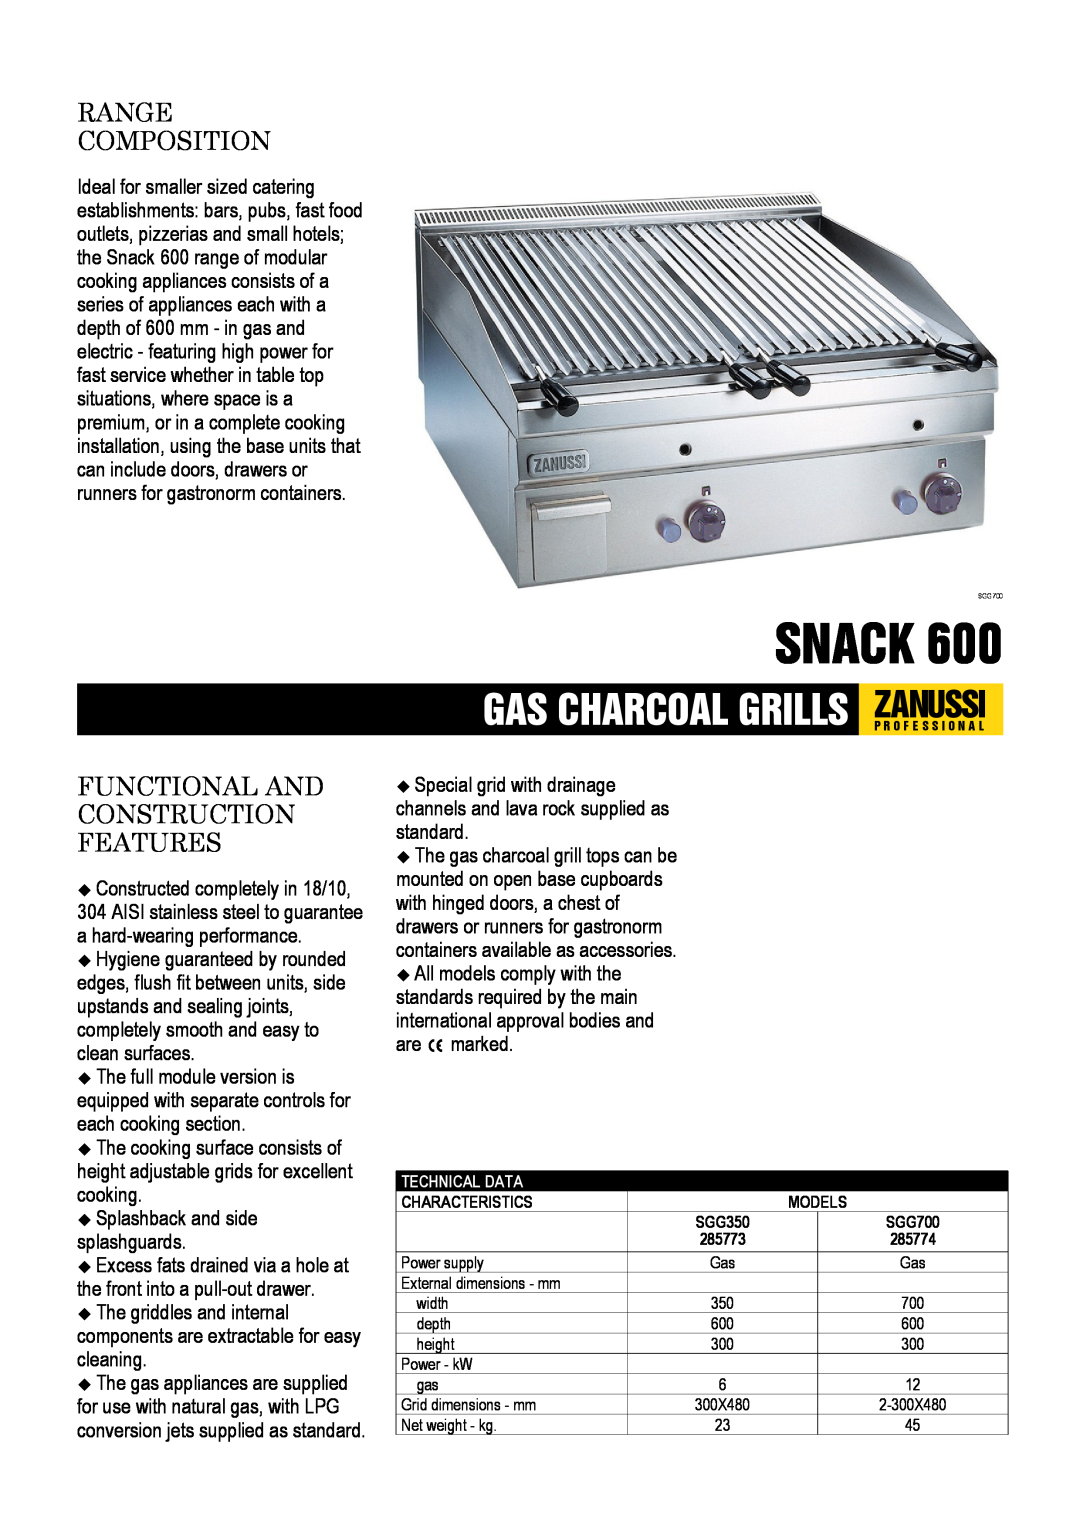 Zanussi SGG350, SGG700, 285773, 285774 dimensions Snack, Range Composition, Functional And Construction Features 